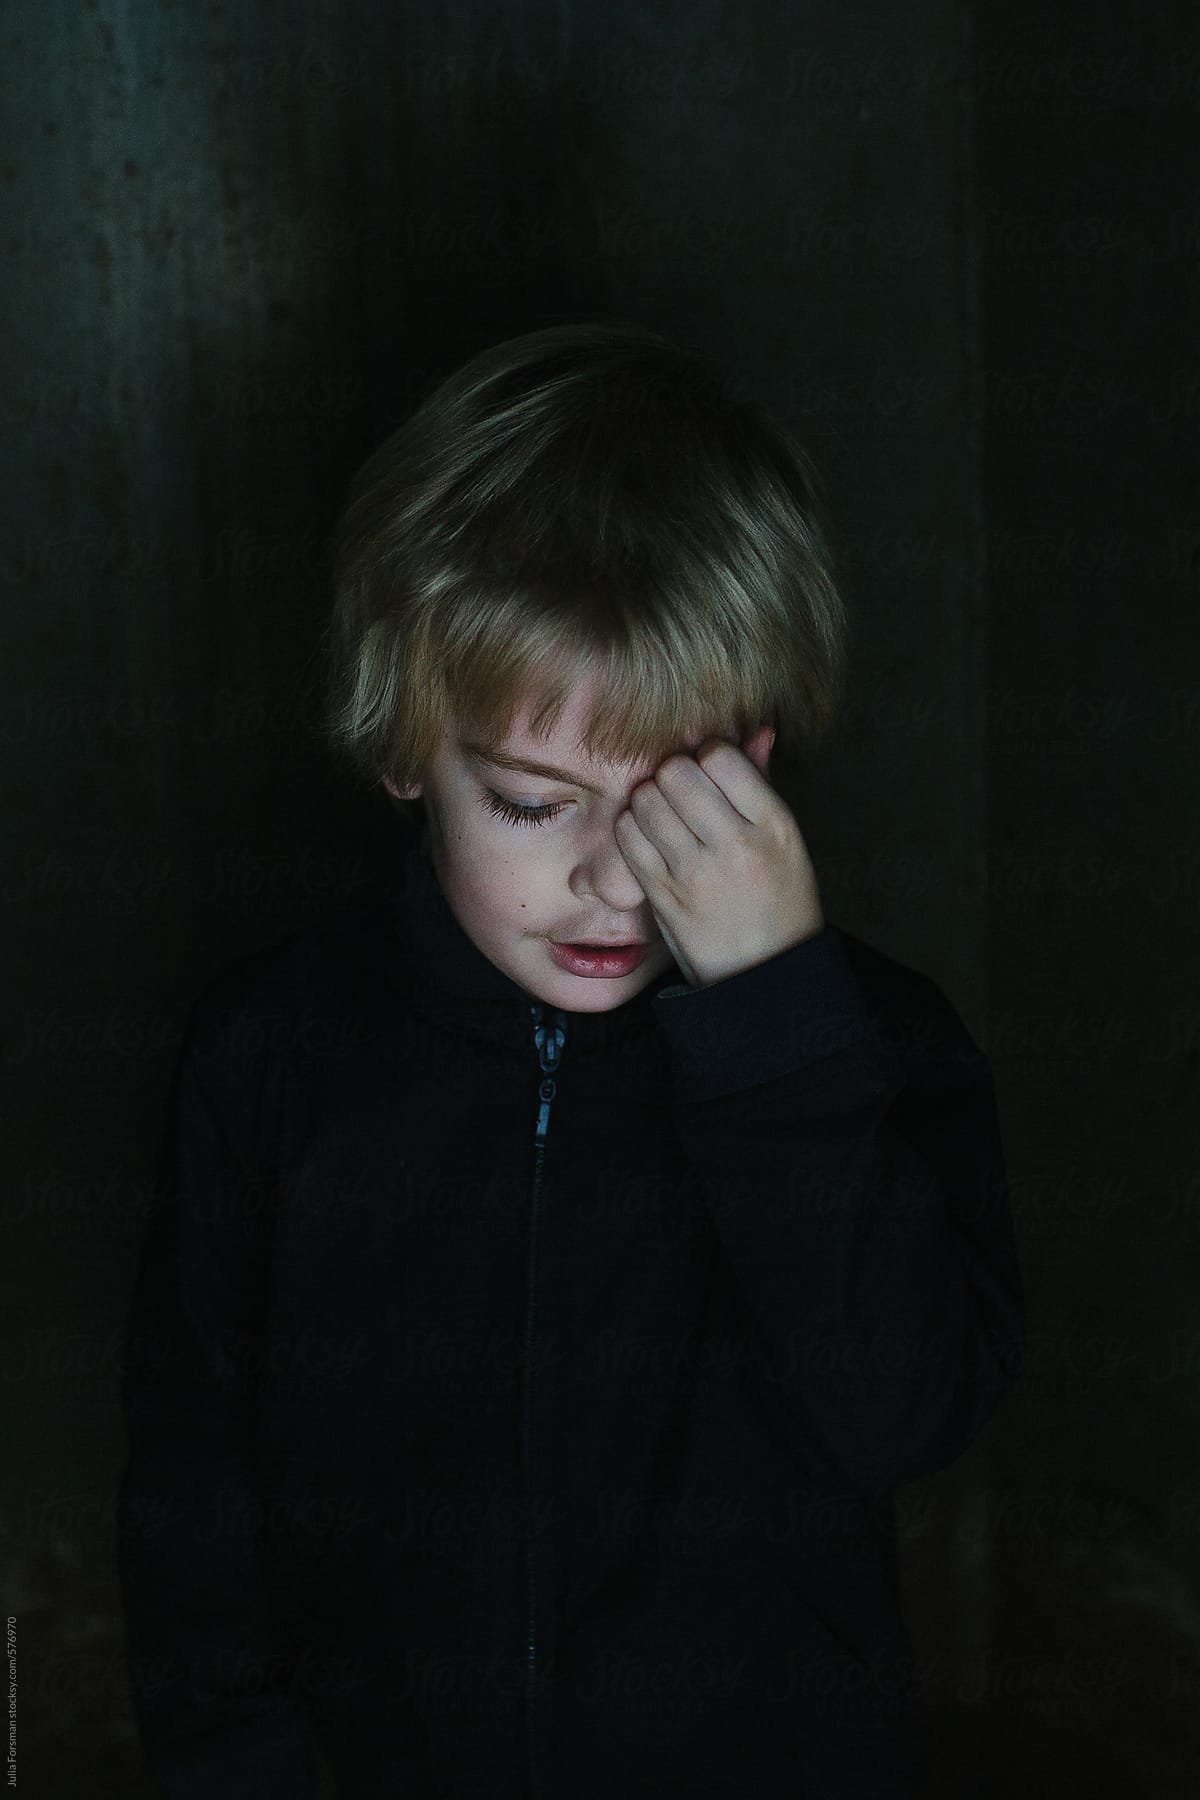 Low light, painterly image of a young boy rubbing his eye.